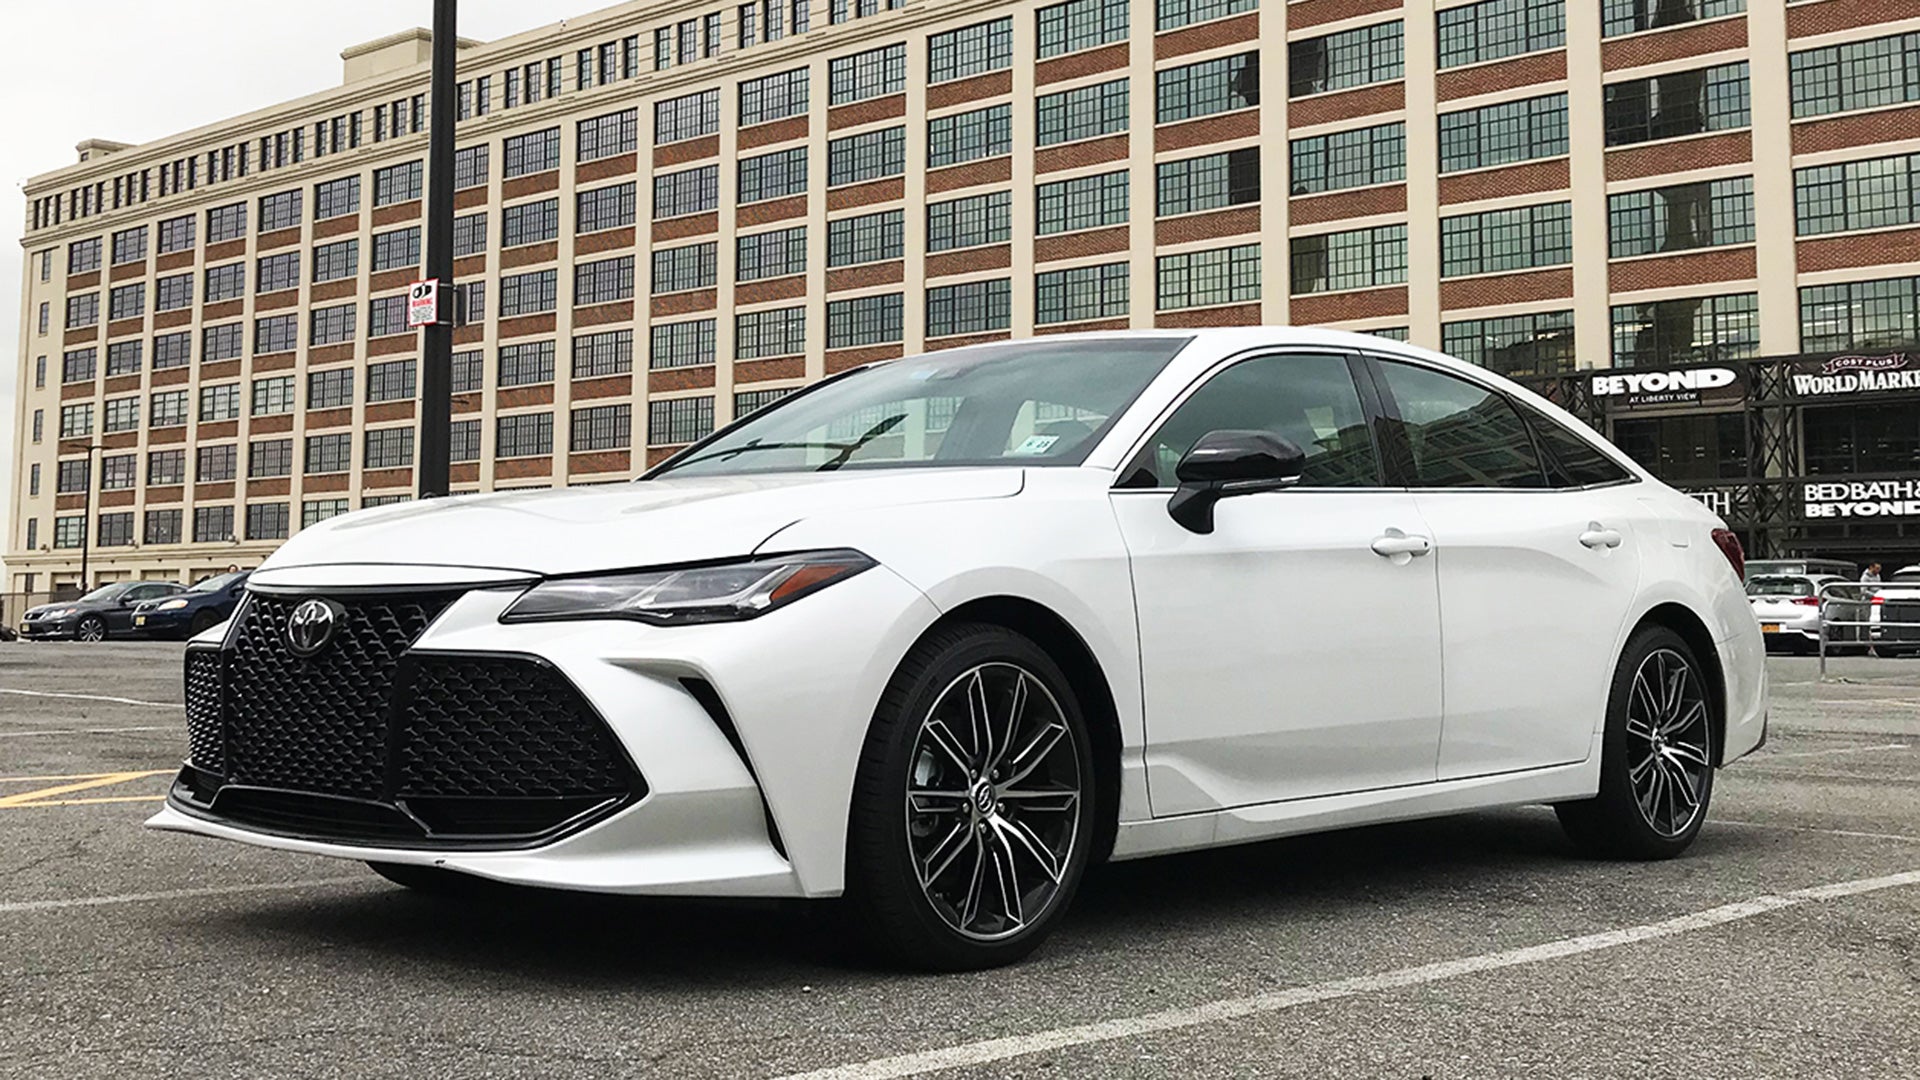 2019 Toyota Avalon Hybrid Test Drive Review: A Full-Size Sedan With a